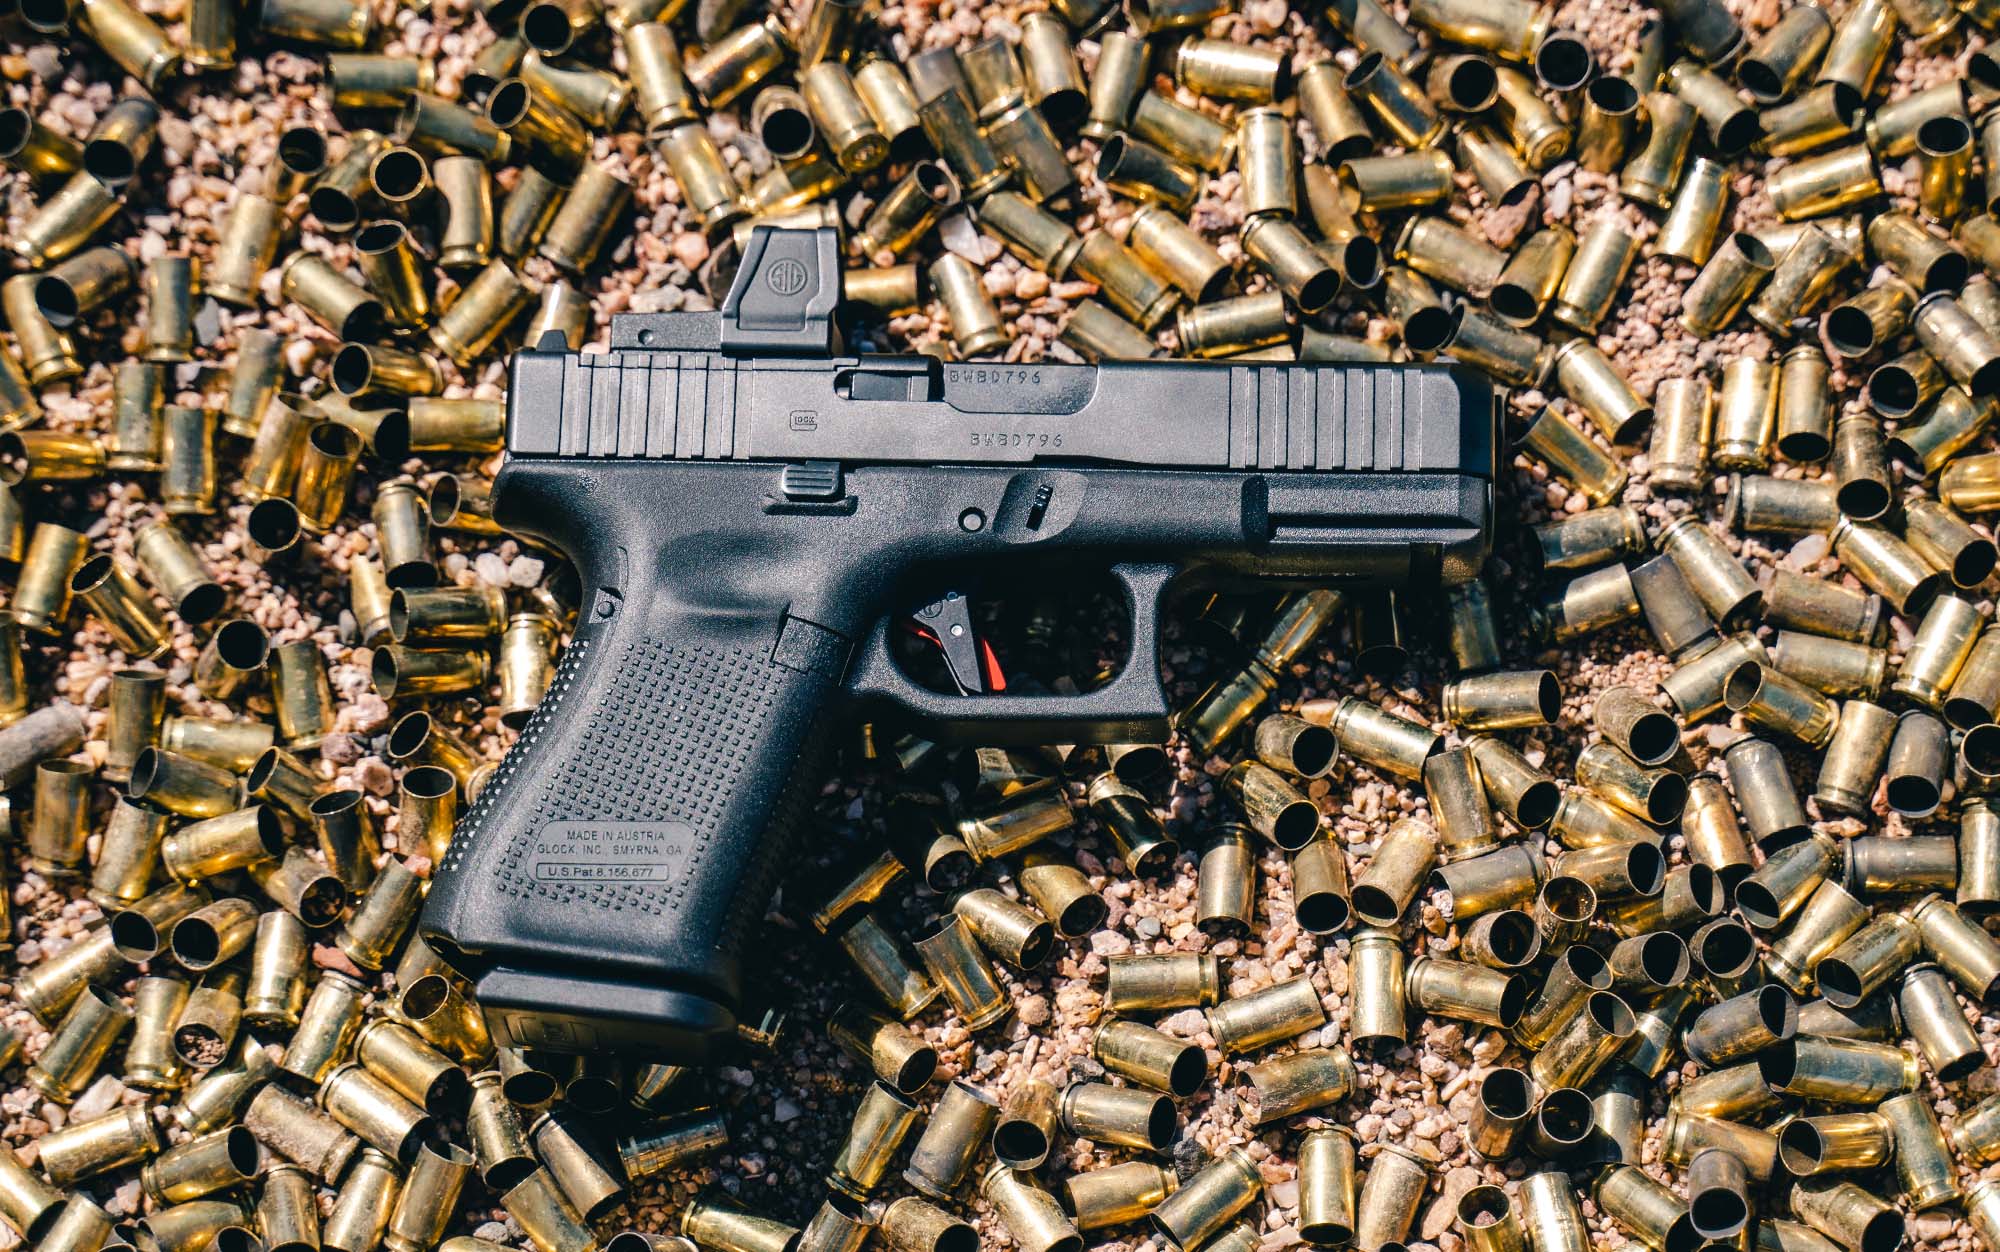 The Glock 19 one of the undisputed, best concealed carry guns